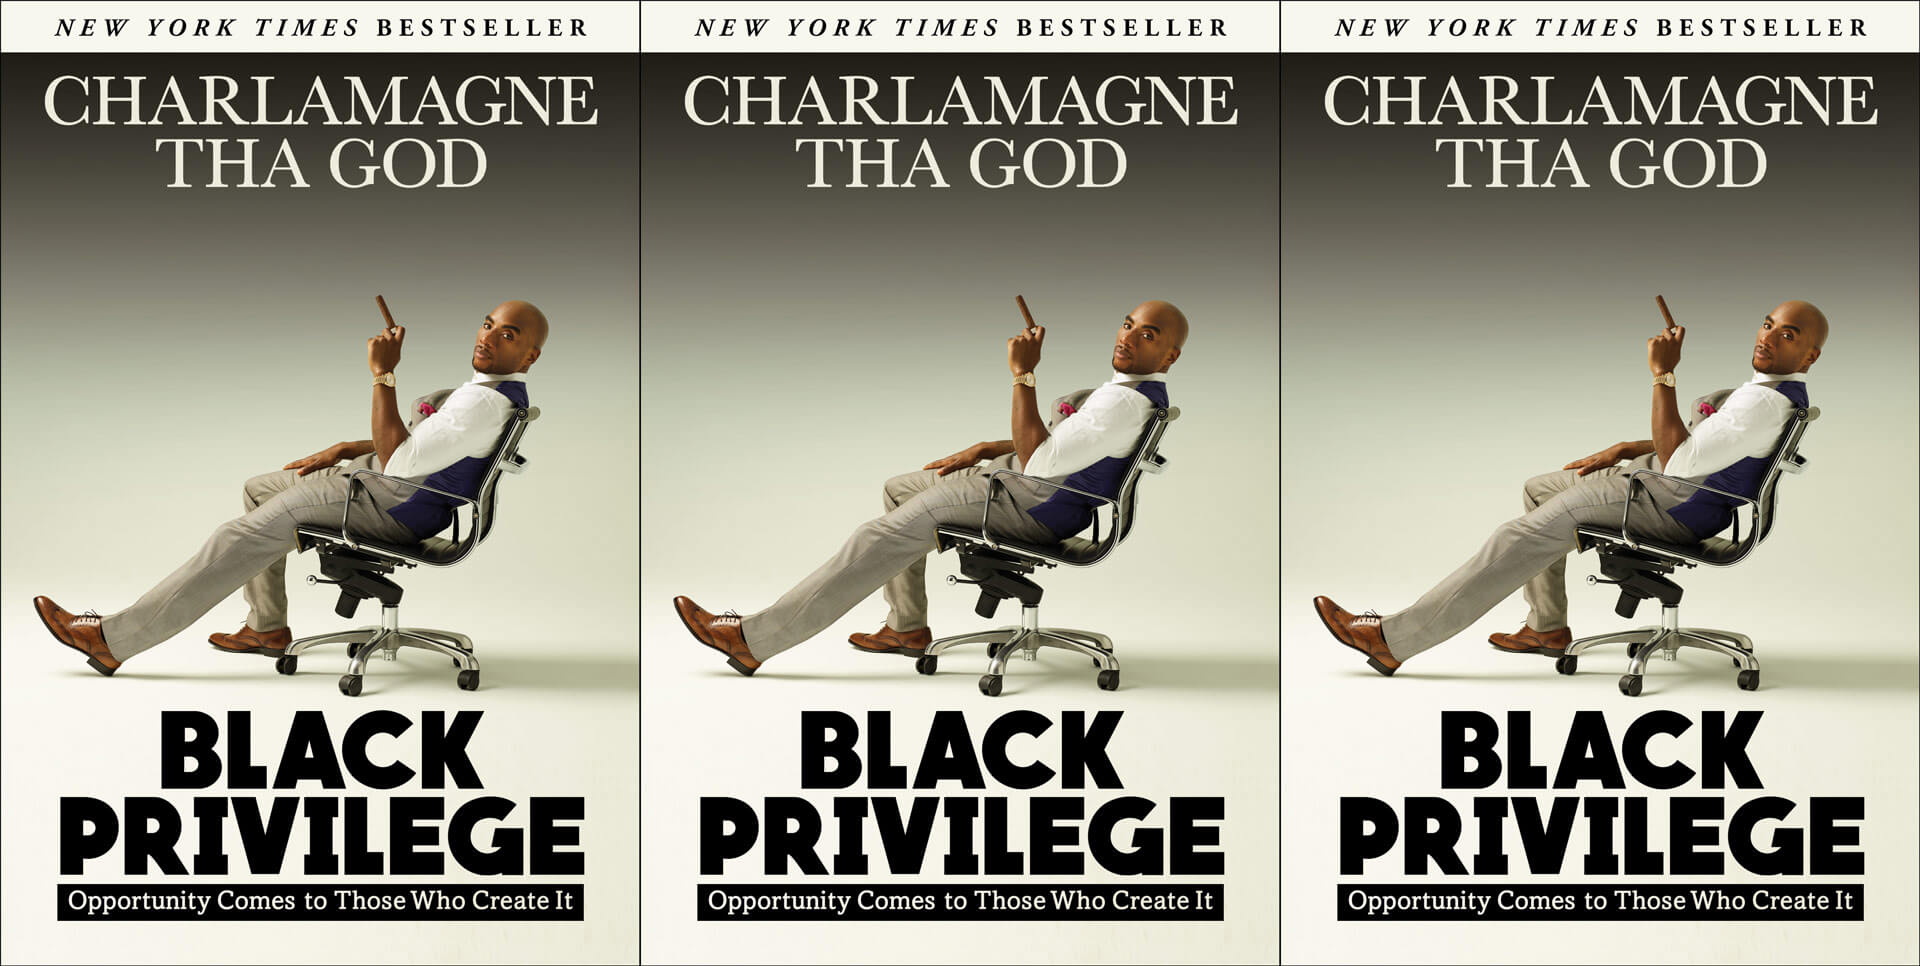 Charlamagne tha God's book, Black Privilege: Opportunity Comes to Those Who Create It